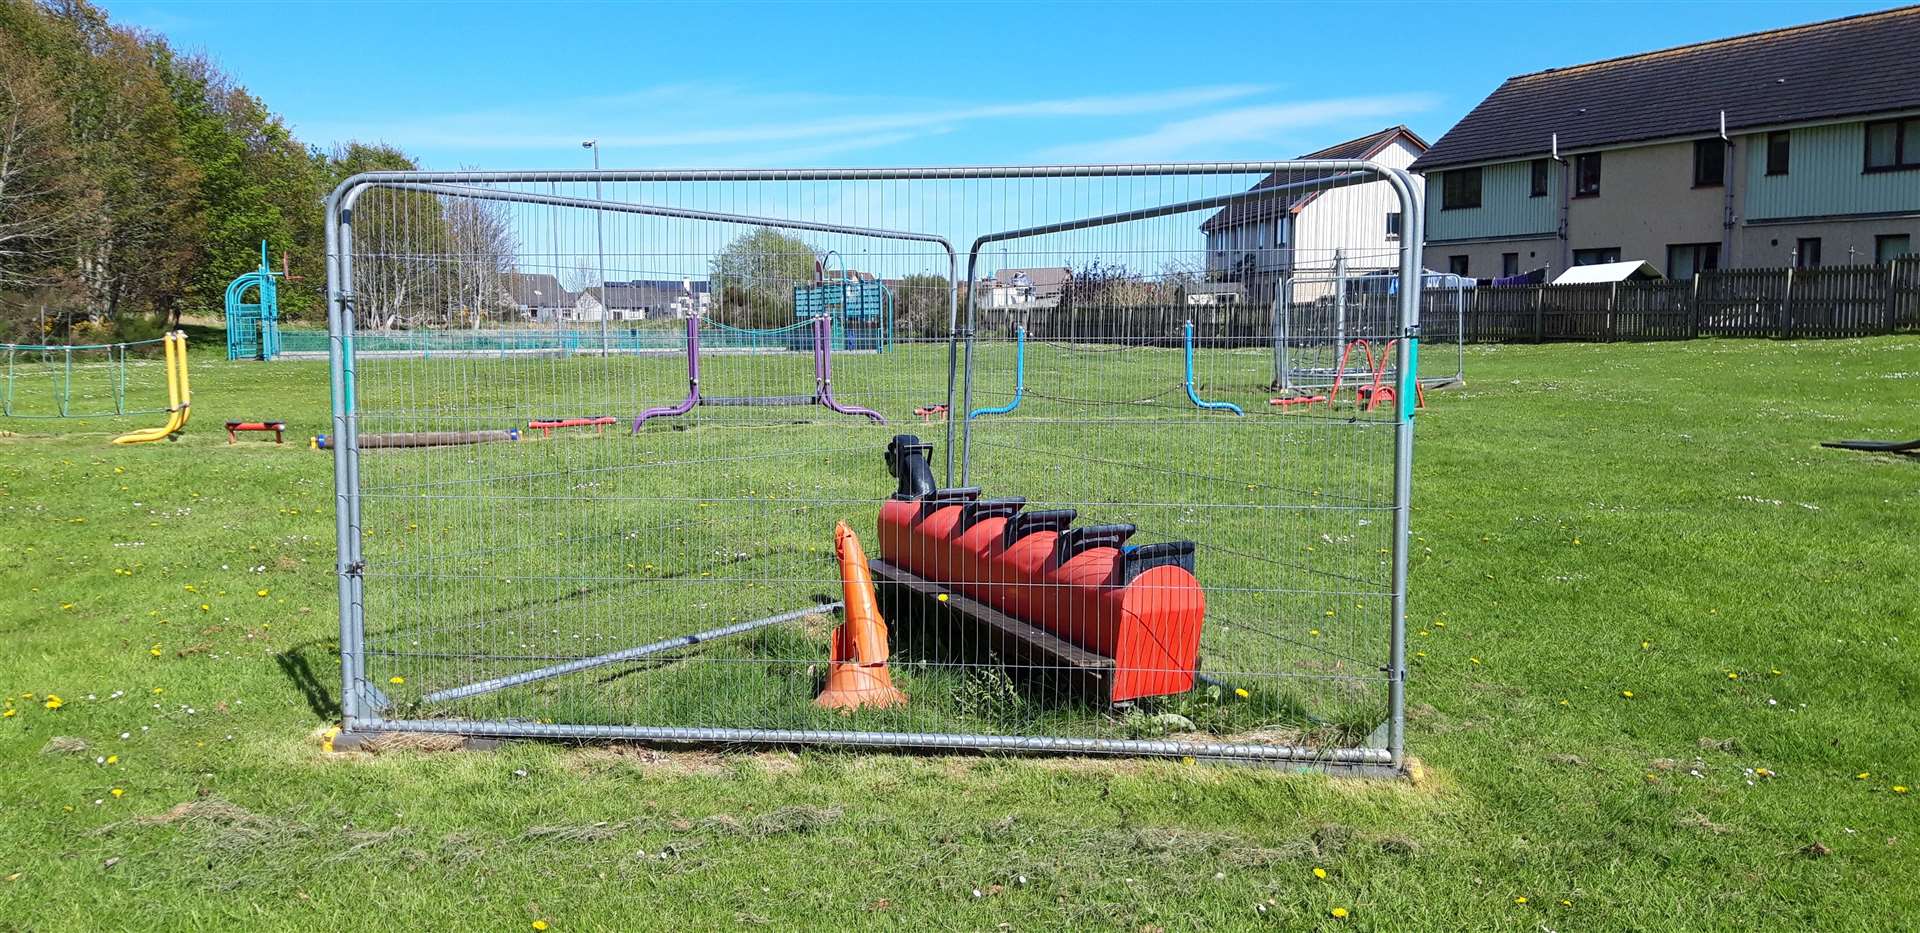 Playparks across the county are in need of an upgrade, such as this one at Bishopfield, Dornoch, where play equipment has been fenced off for safety reasons.